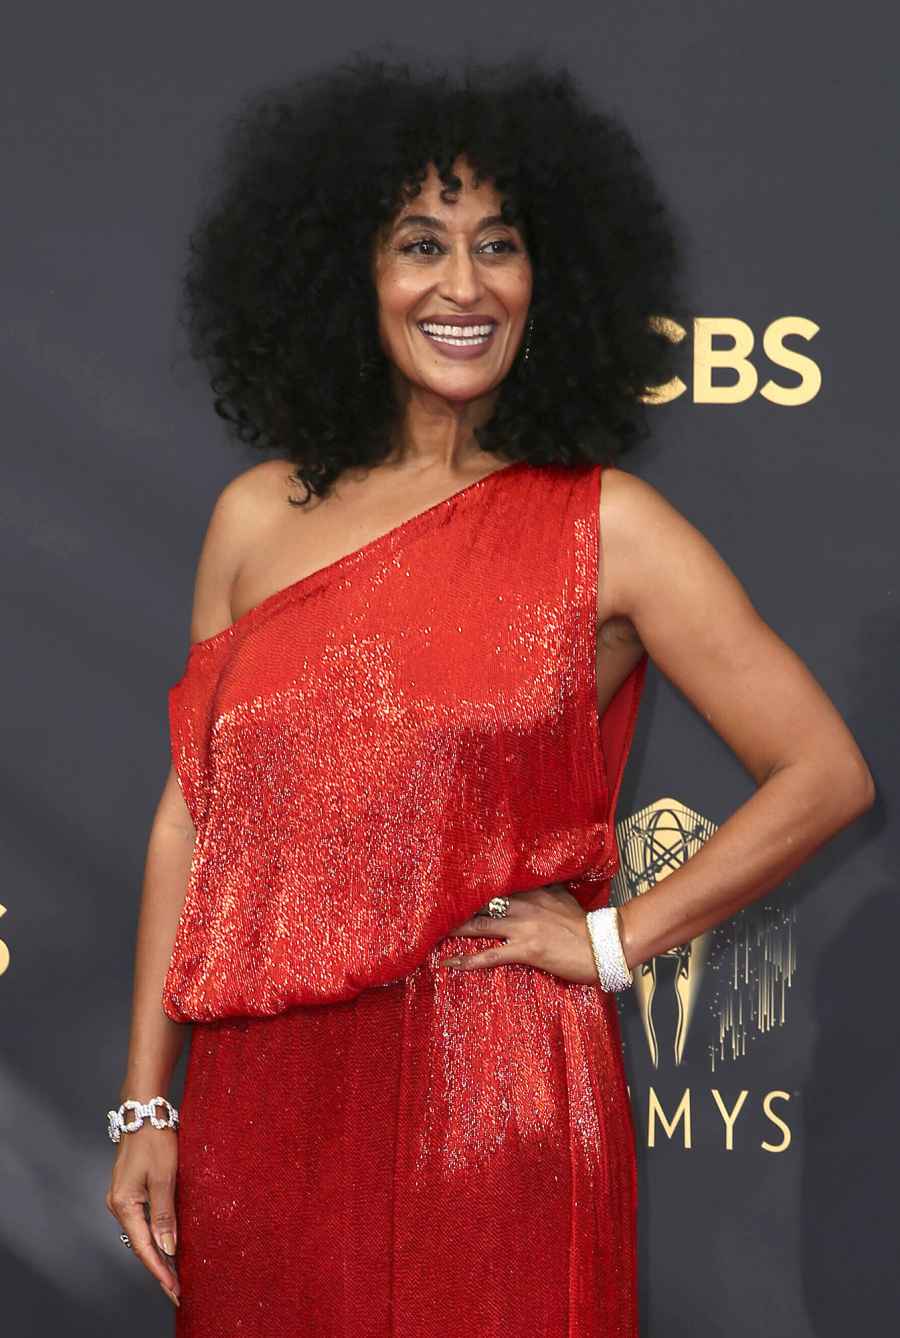 Tracee Ellis Ross Jewelry From the 2021 Emmys